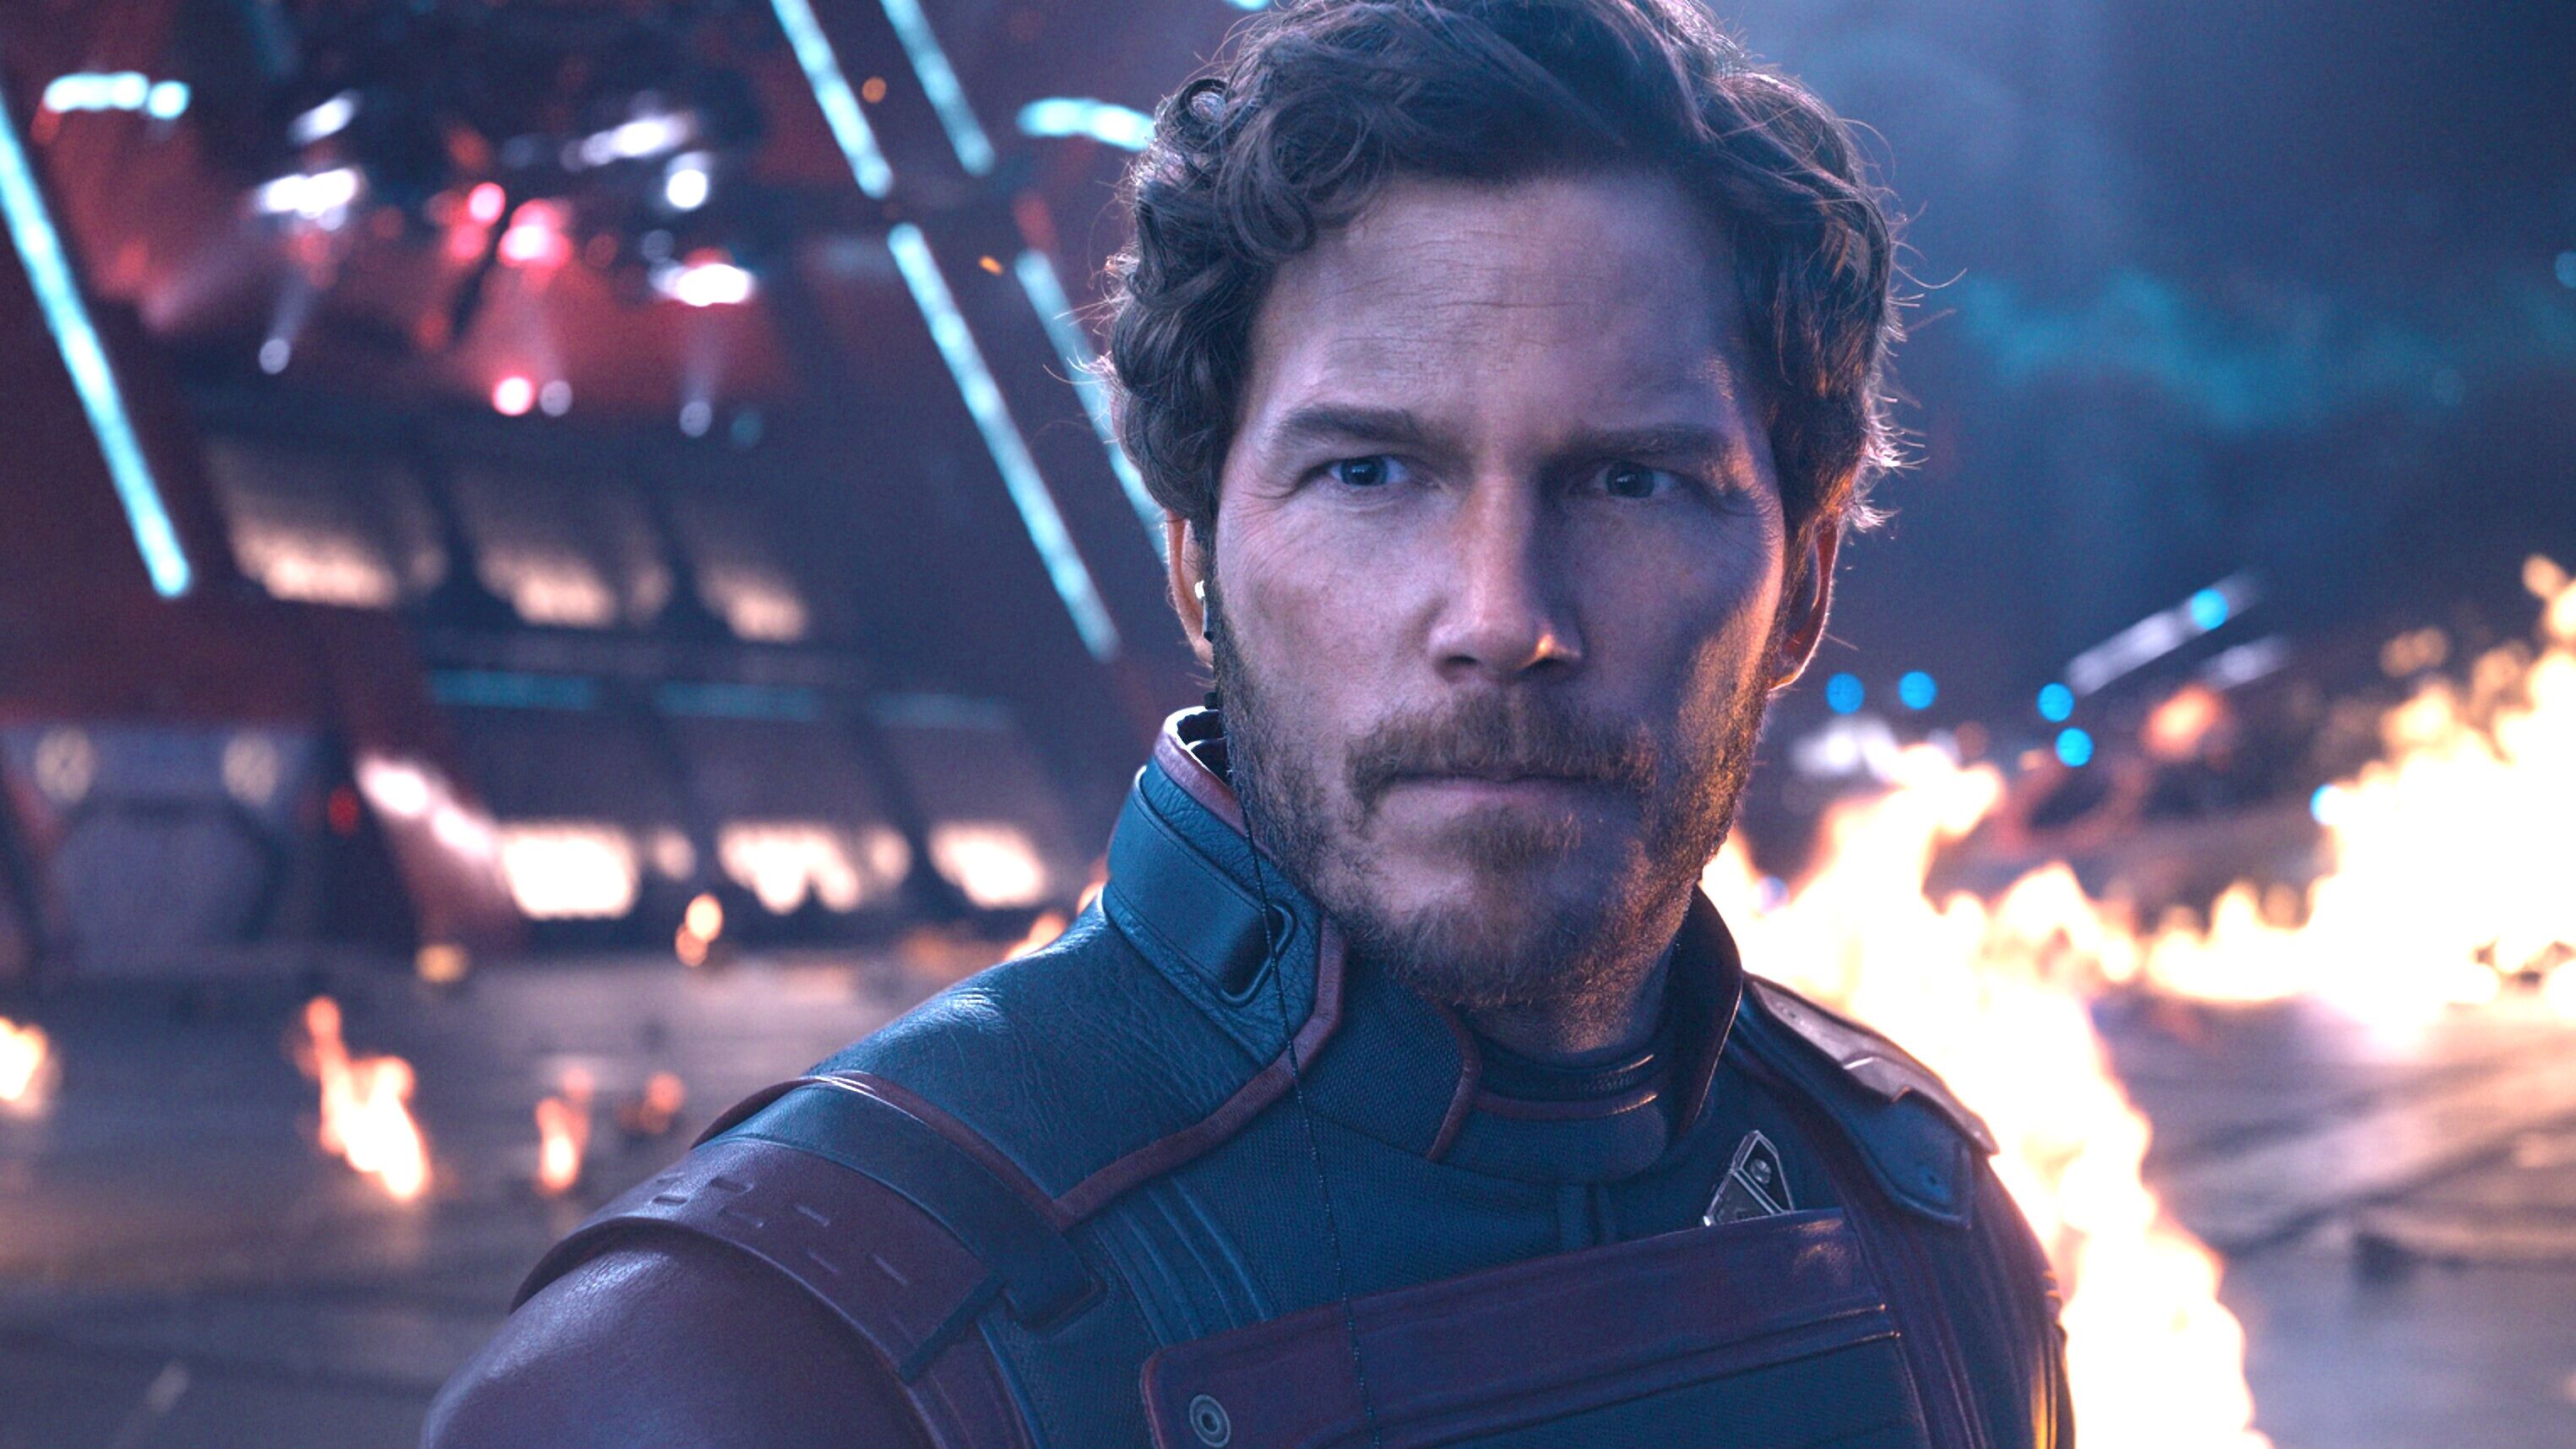 Will There Be a Guardians of the Galaxy 4? Chris Pratt's Star-Lord